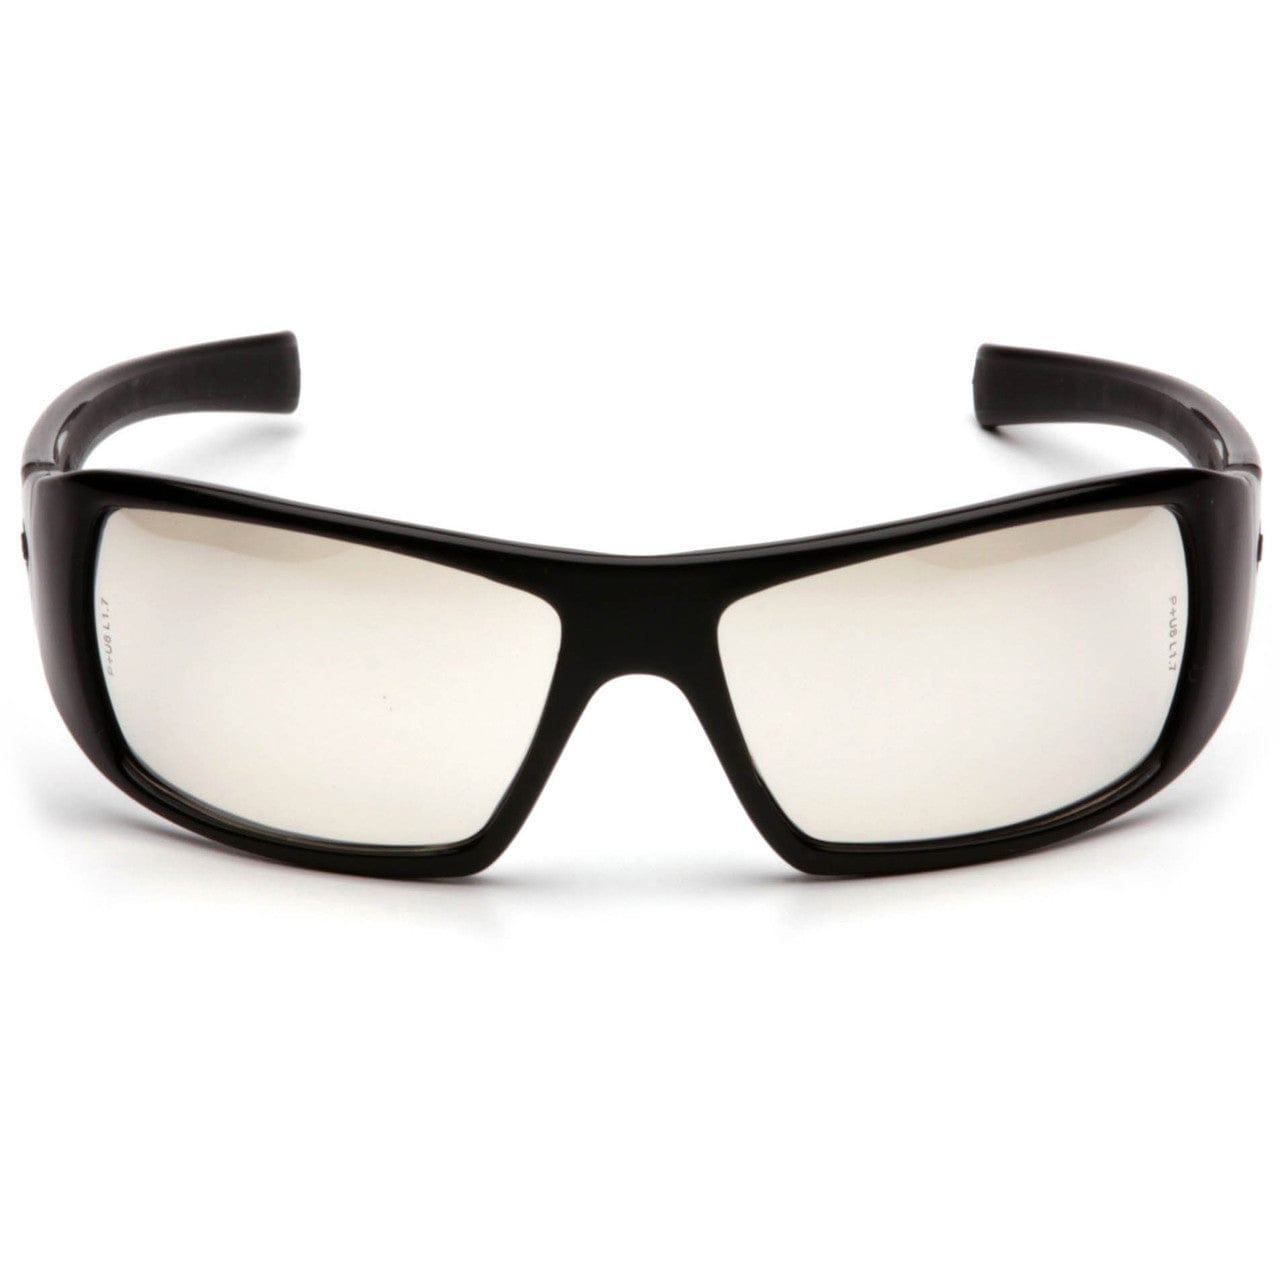 Pyramex Goliath Safety Glasses with Black Frame and Indoor/Outdoor Lens SB5680D Front View